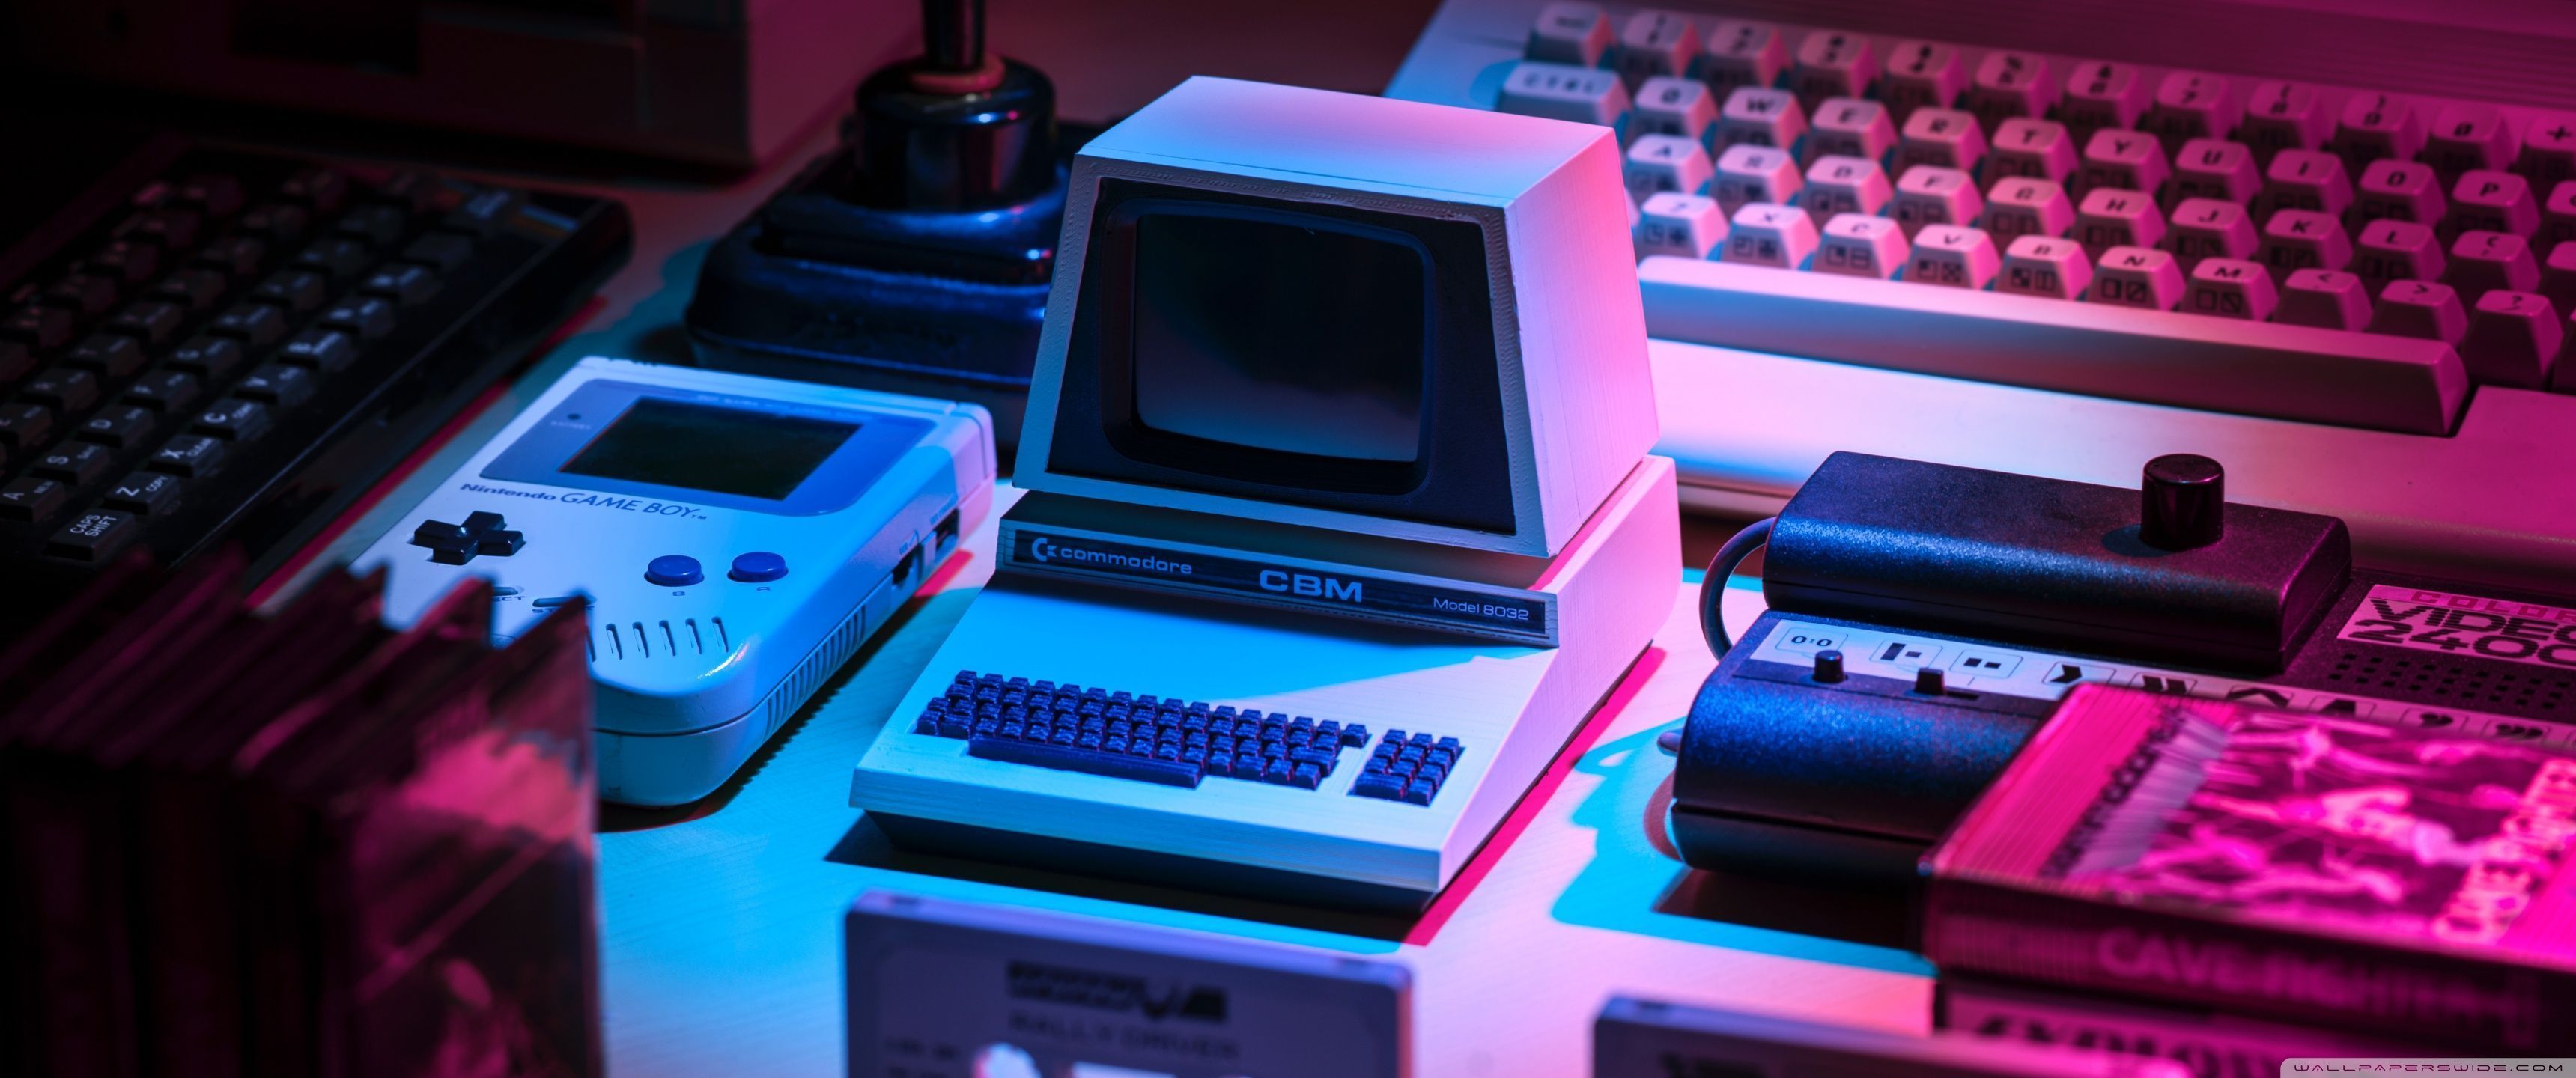 A computer and other electronic devices on display - 3440x1440